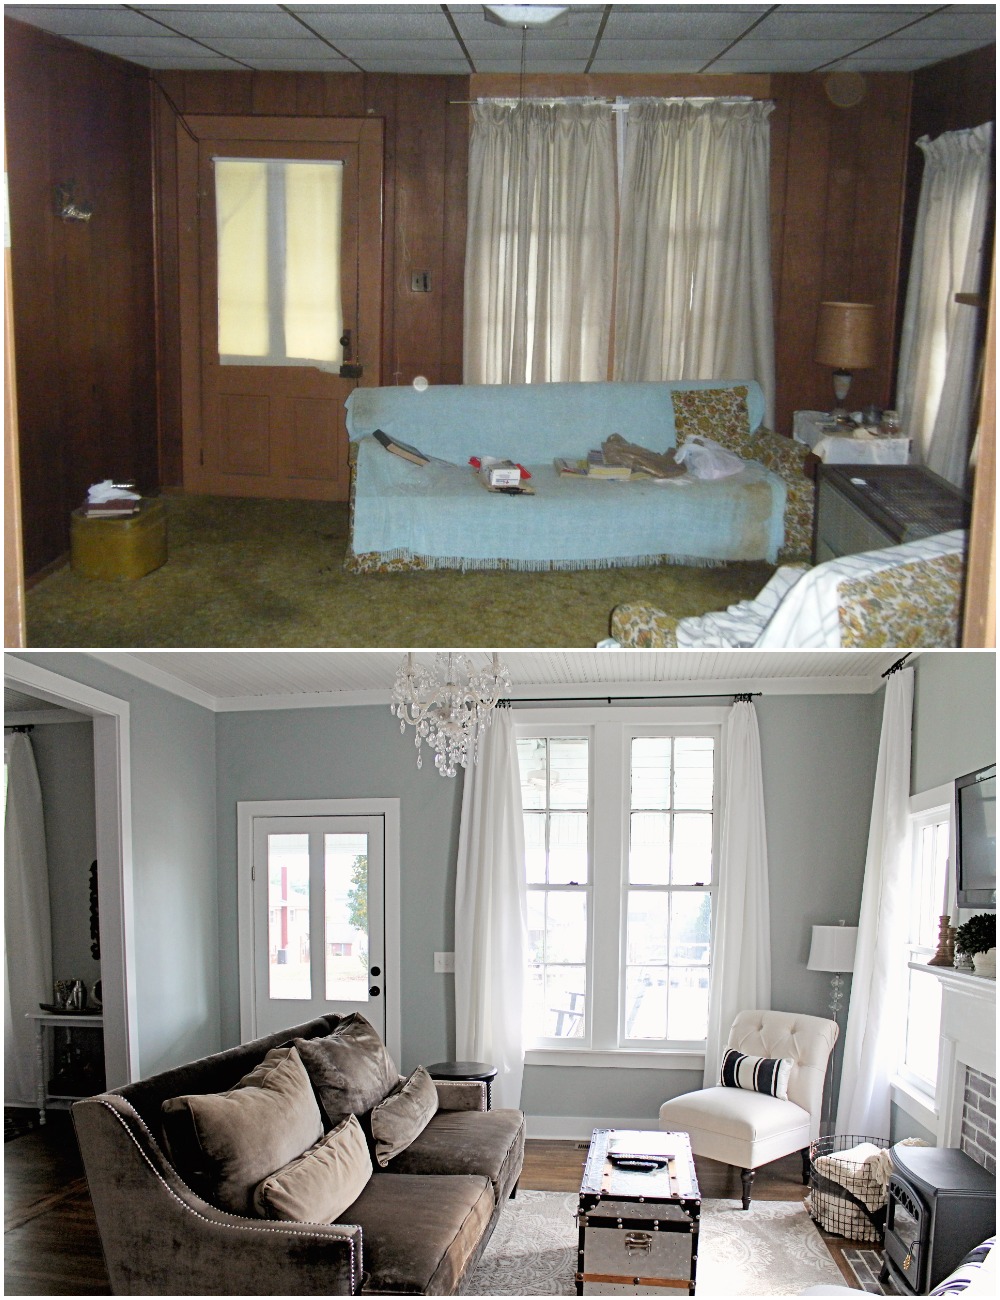 Elizabeth Burns Design  Budget-Friendly Fixer Upper Farmhouse Before and After House Flip - DIY Living Room with Faux Fireplace and French Doors - Sherwin Williams Magnetic Gray (6).jpg